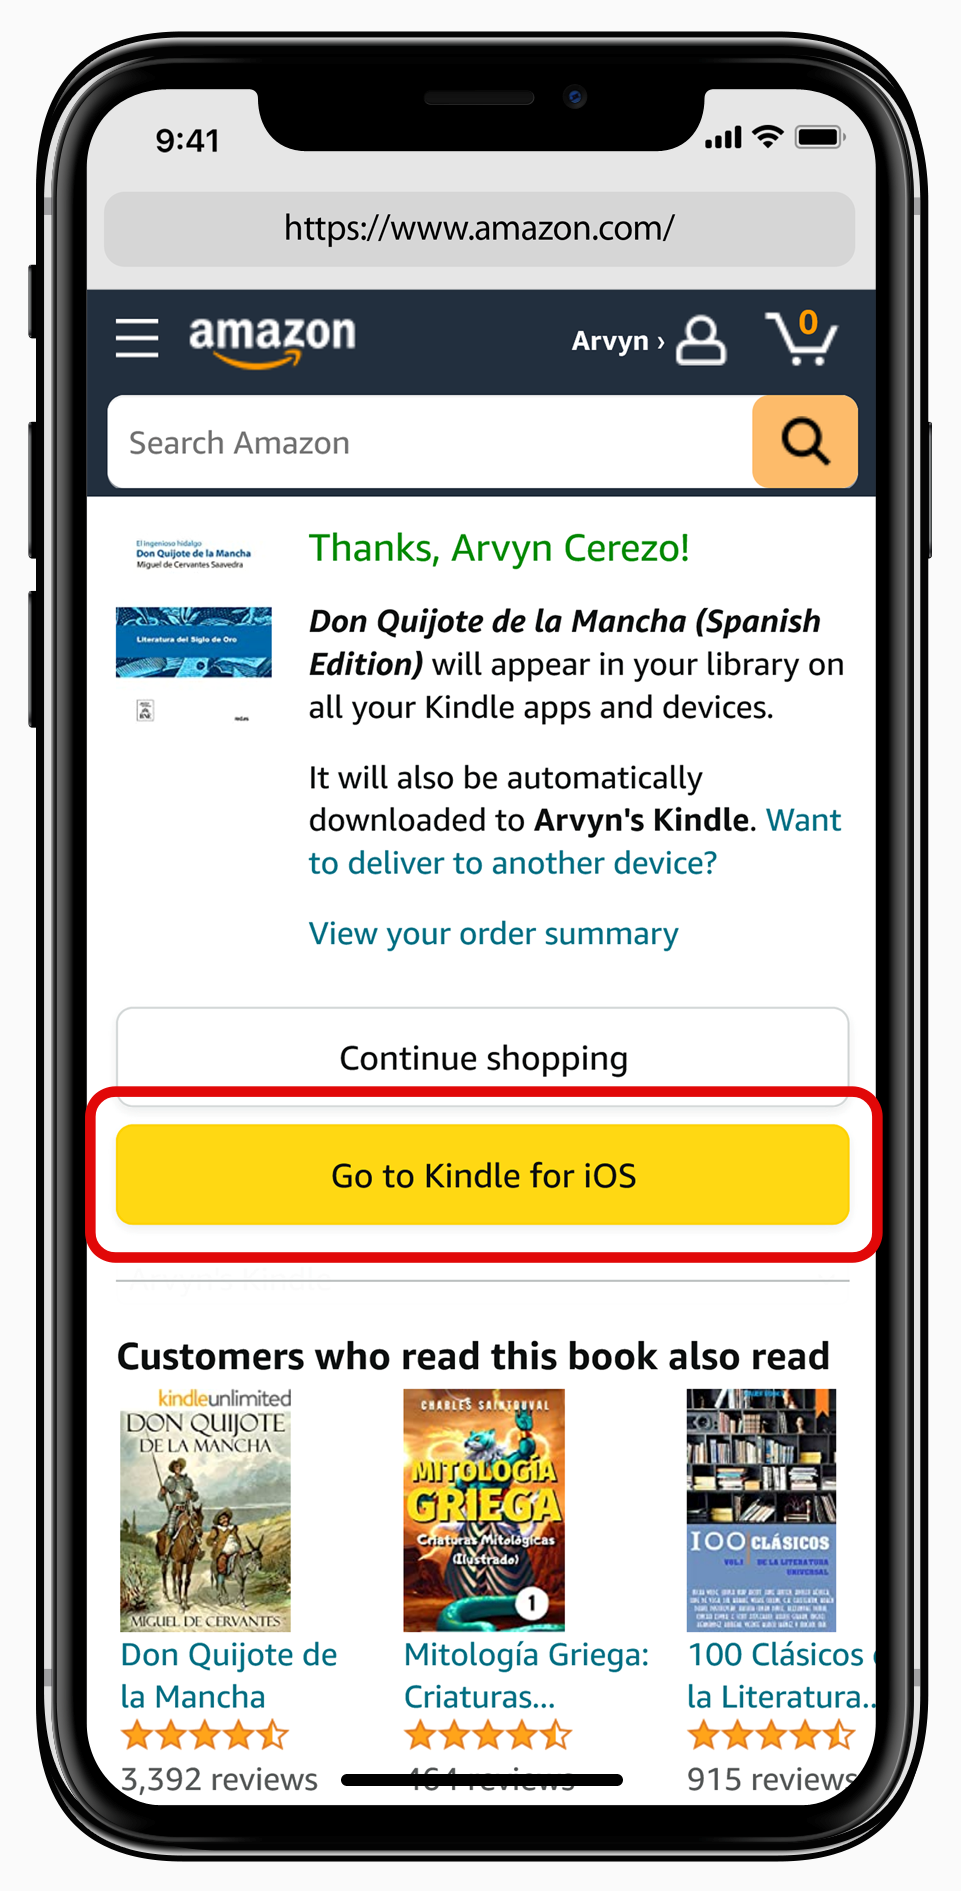 Amazon Kindle Store Success Page on an iPhone